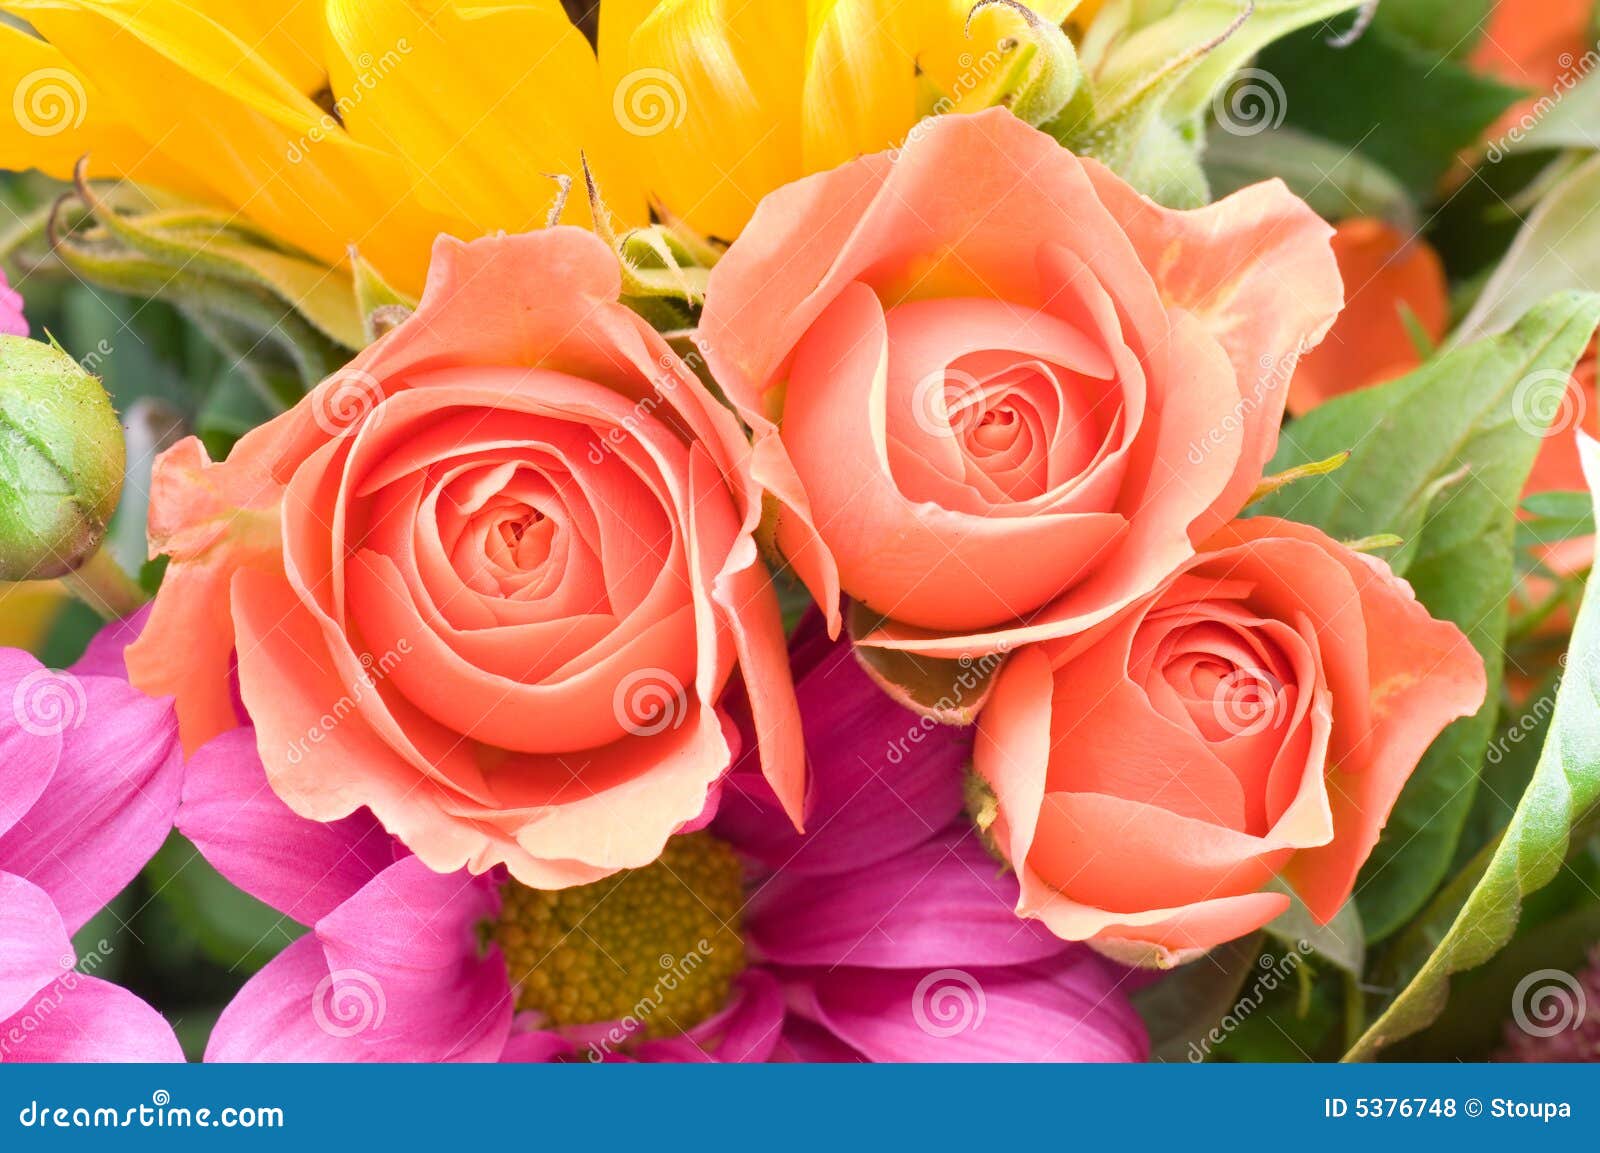 Flower Bunch Royalty Free Stock Photos - Image: 5376748